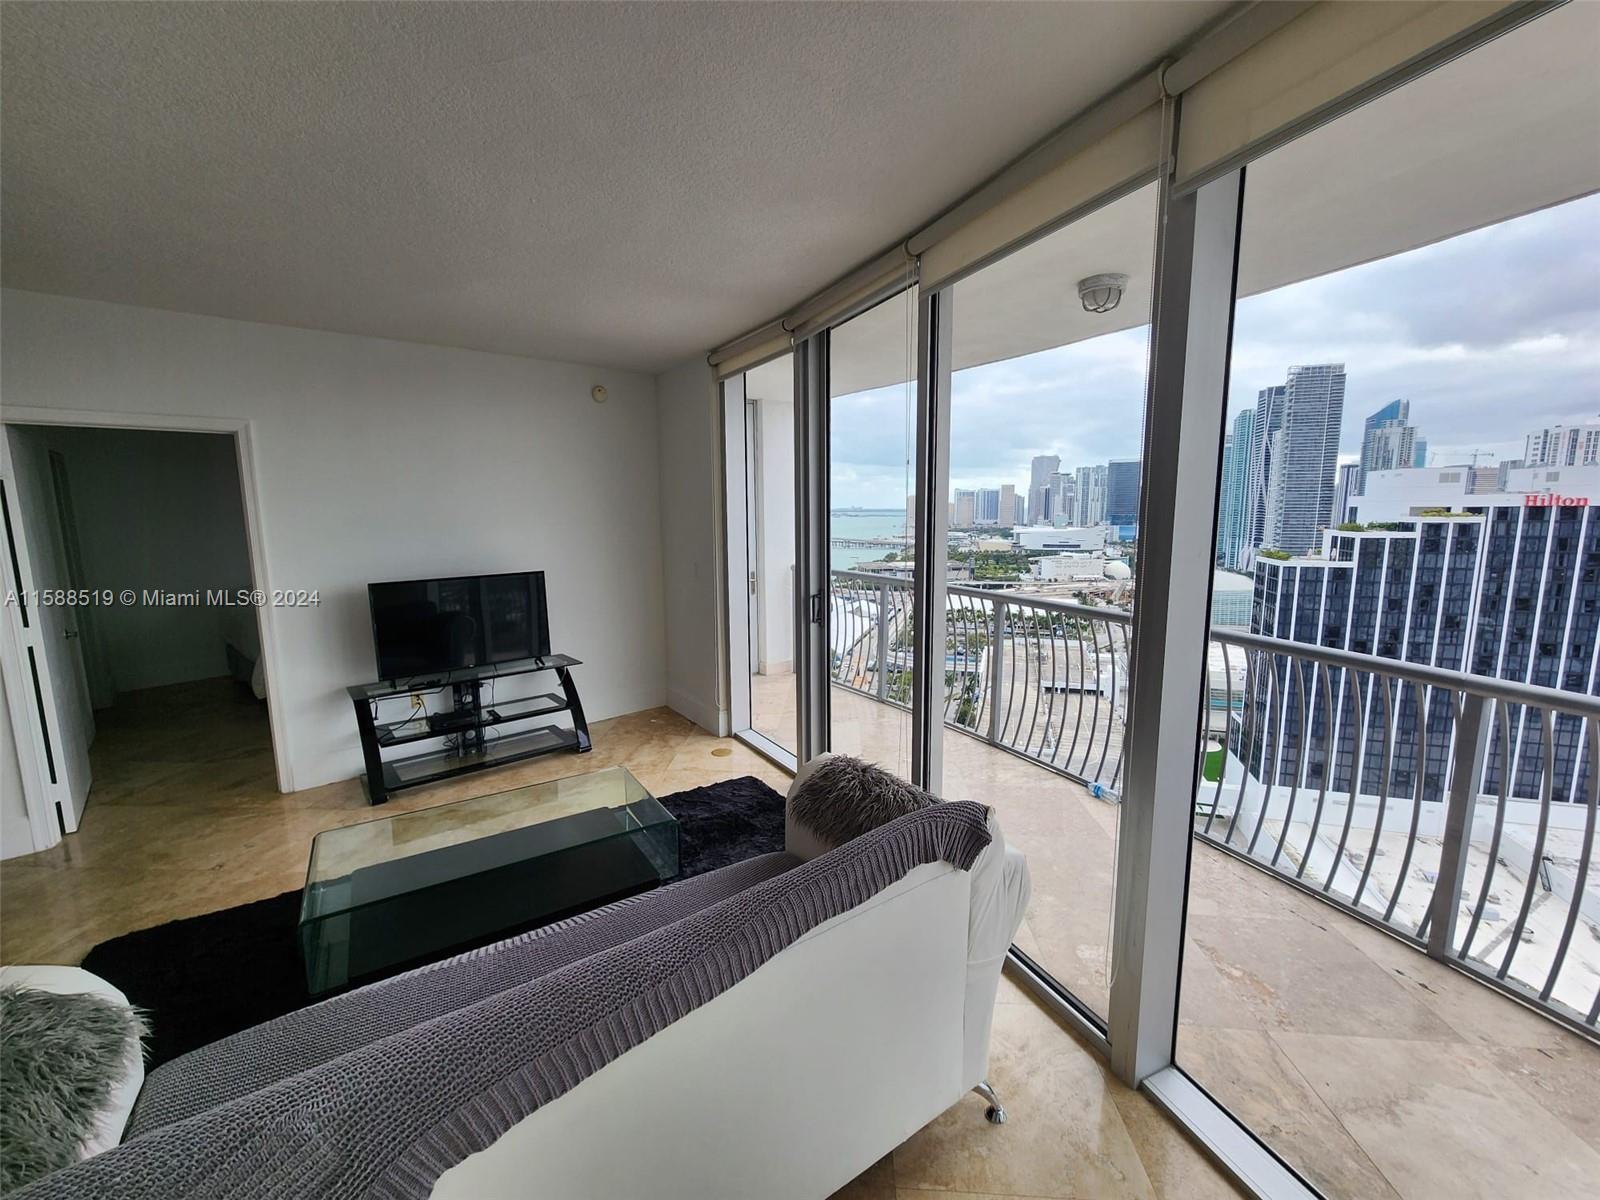 Spectacular Views Of Downtown Miami. 2 Beds/2 Bath Condo With Large Balcony. Floor To Ceiling Windows, Modern Open Kitchen With Stainless Steel Appliances And Granite Countertops, W/d Inside The Unit. Amenities: Pool, Social Events Room, New Gym, Jacuzzi, Bbq Area, Valet Parking, 24/7 Concierge, And Convenience Store. Condo Is Located In The Heart Of Miami Close To The Performing Arts Center, American Airlines Arena, And Bayside Marketplace Within Short Driving Distance From Miami Beach And Airport. Short Distance To Areas Of Wynwood, Midtown, Downtown, And Brickell By Transiting On The Free Metro-Mover.